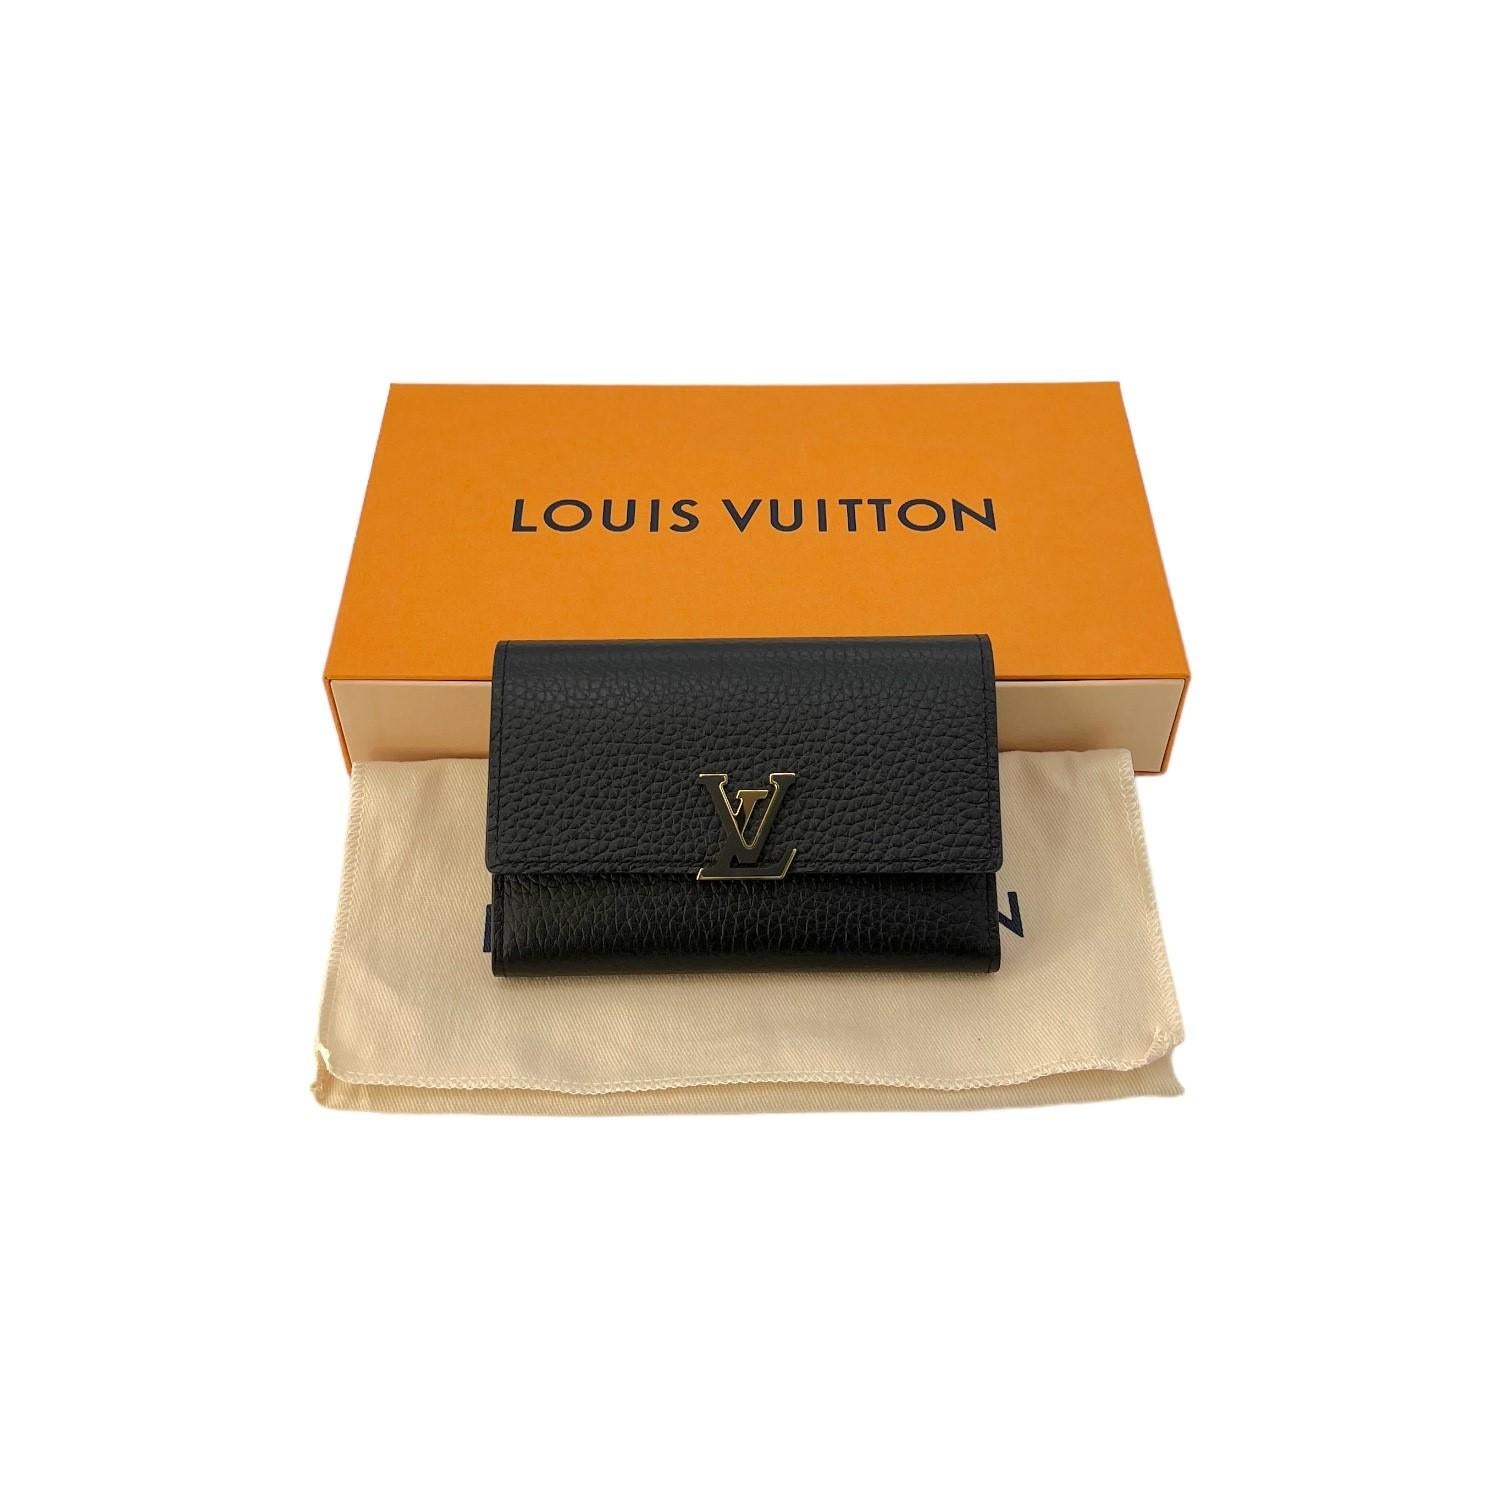 This Louis Vuitton Capucines Compact Wallet was made in France and it is finely crafted of the luxurious black Taurillon leather with gold-tone hardware features. It has a fold over snap closure that opens up to a smooth pink leather interior with 8